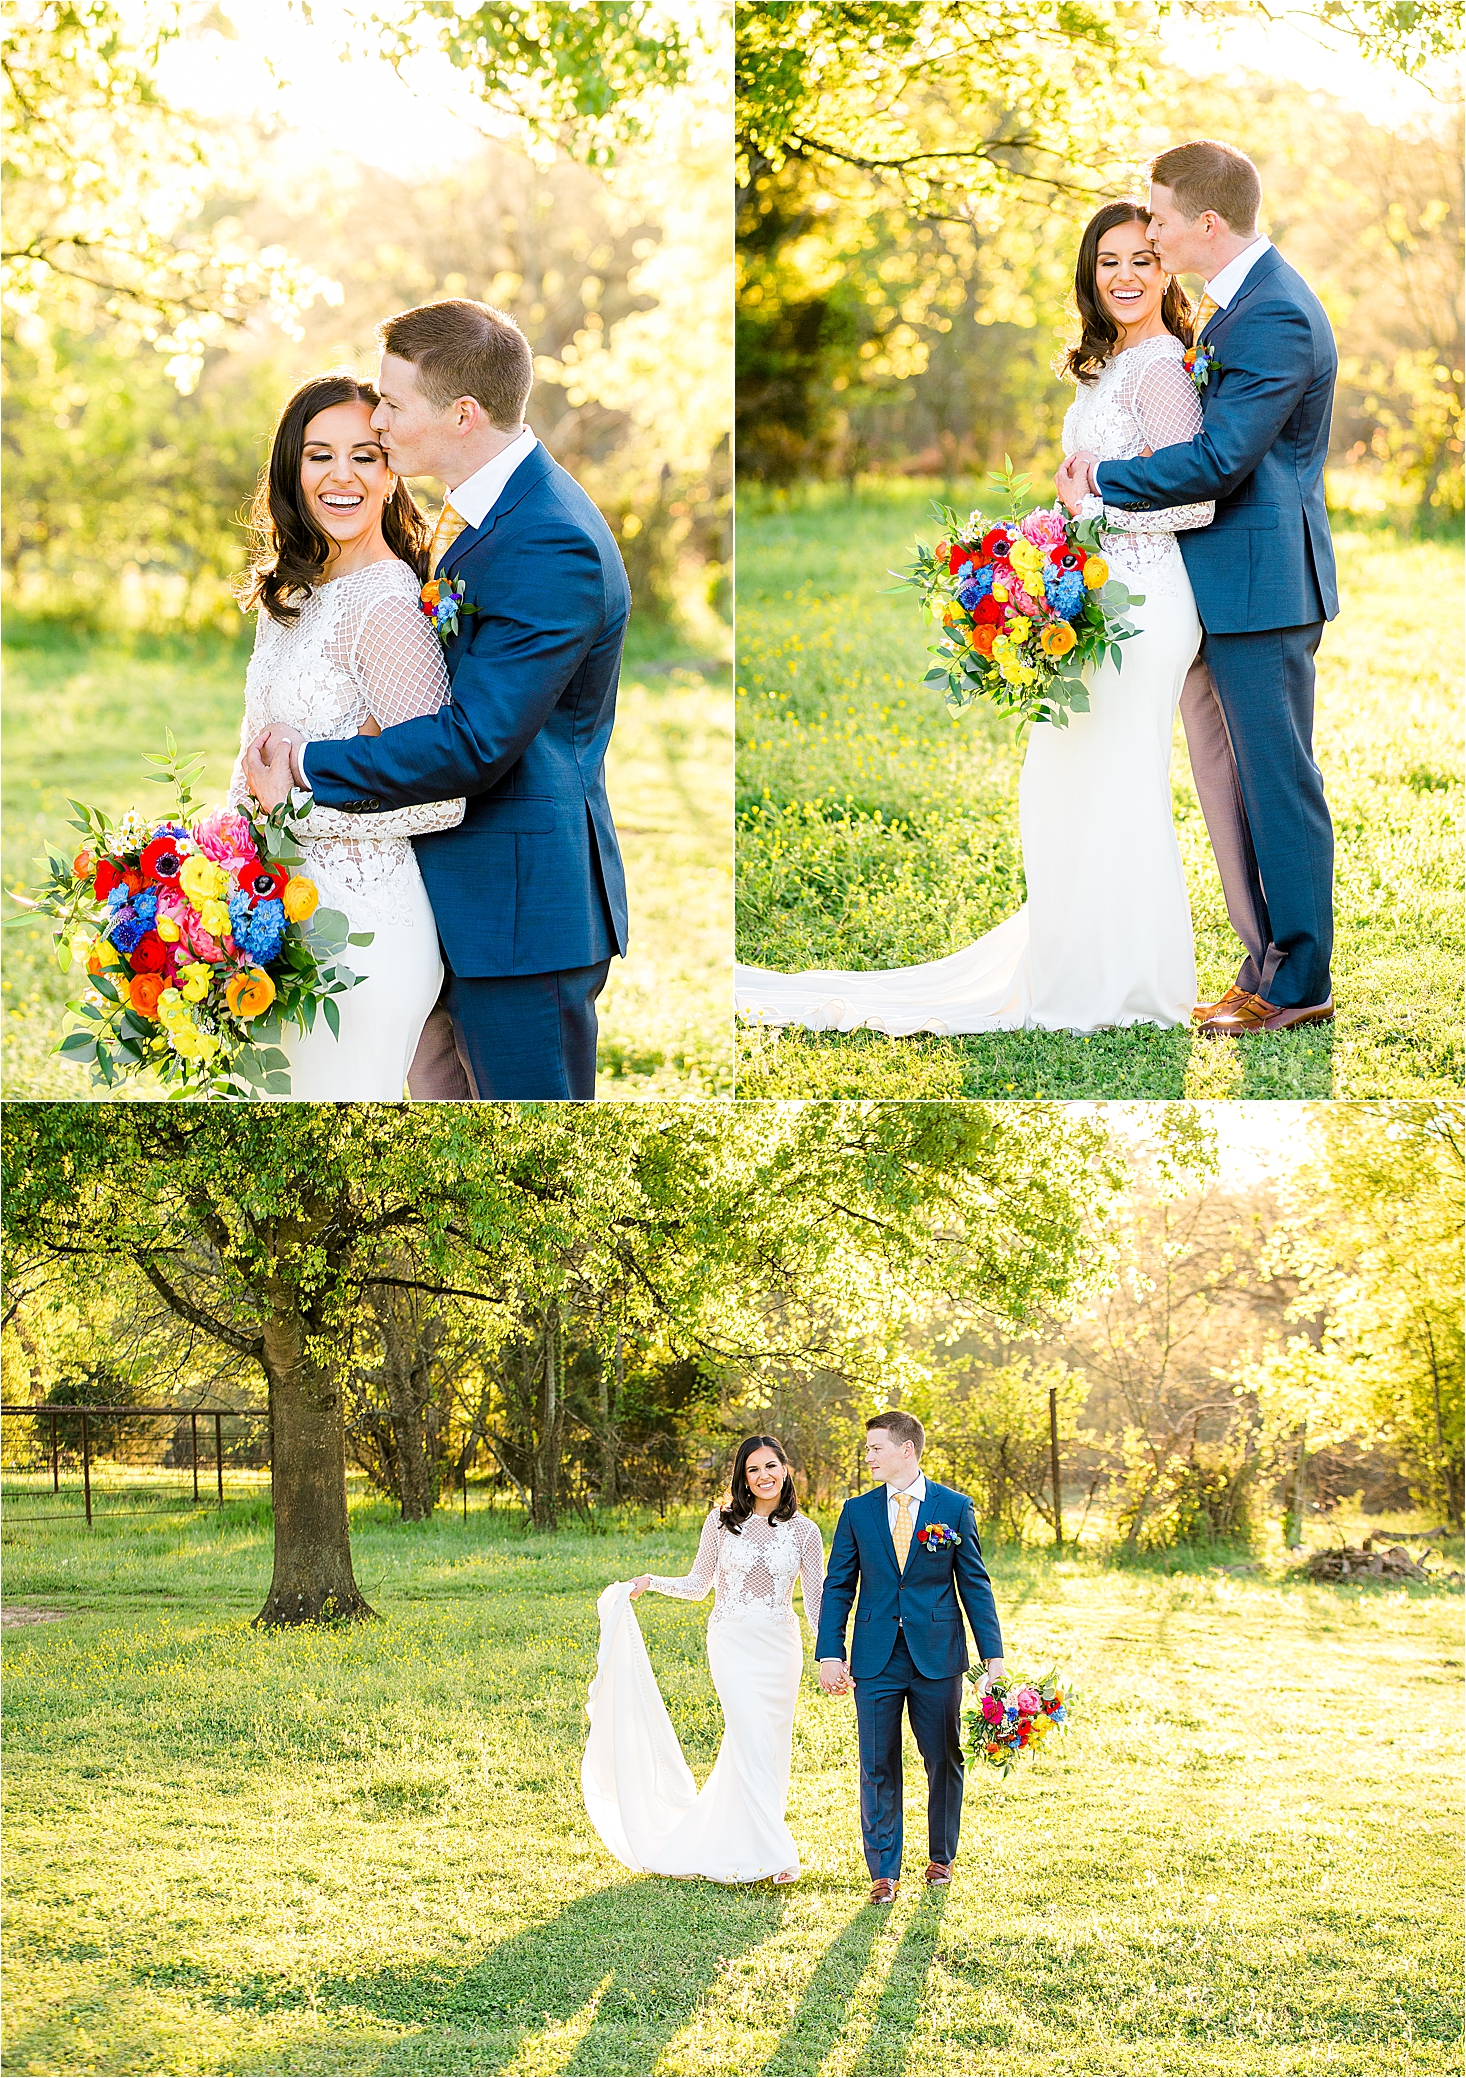 A couple embraces during their outdoor sunset wedding day portraits at Pineway Farms in East Texas 